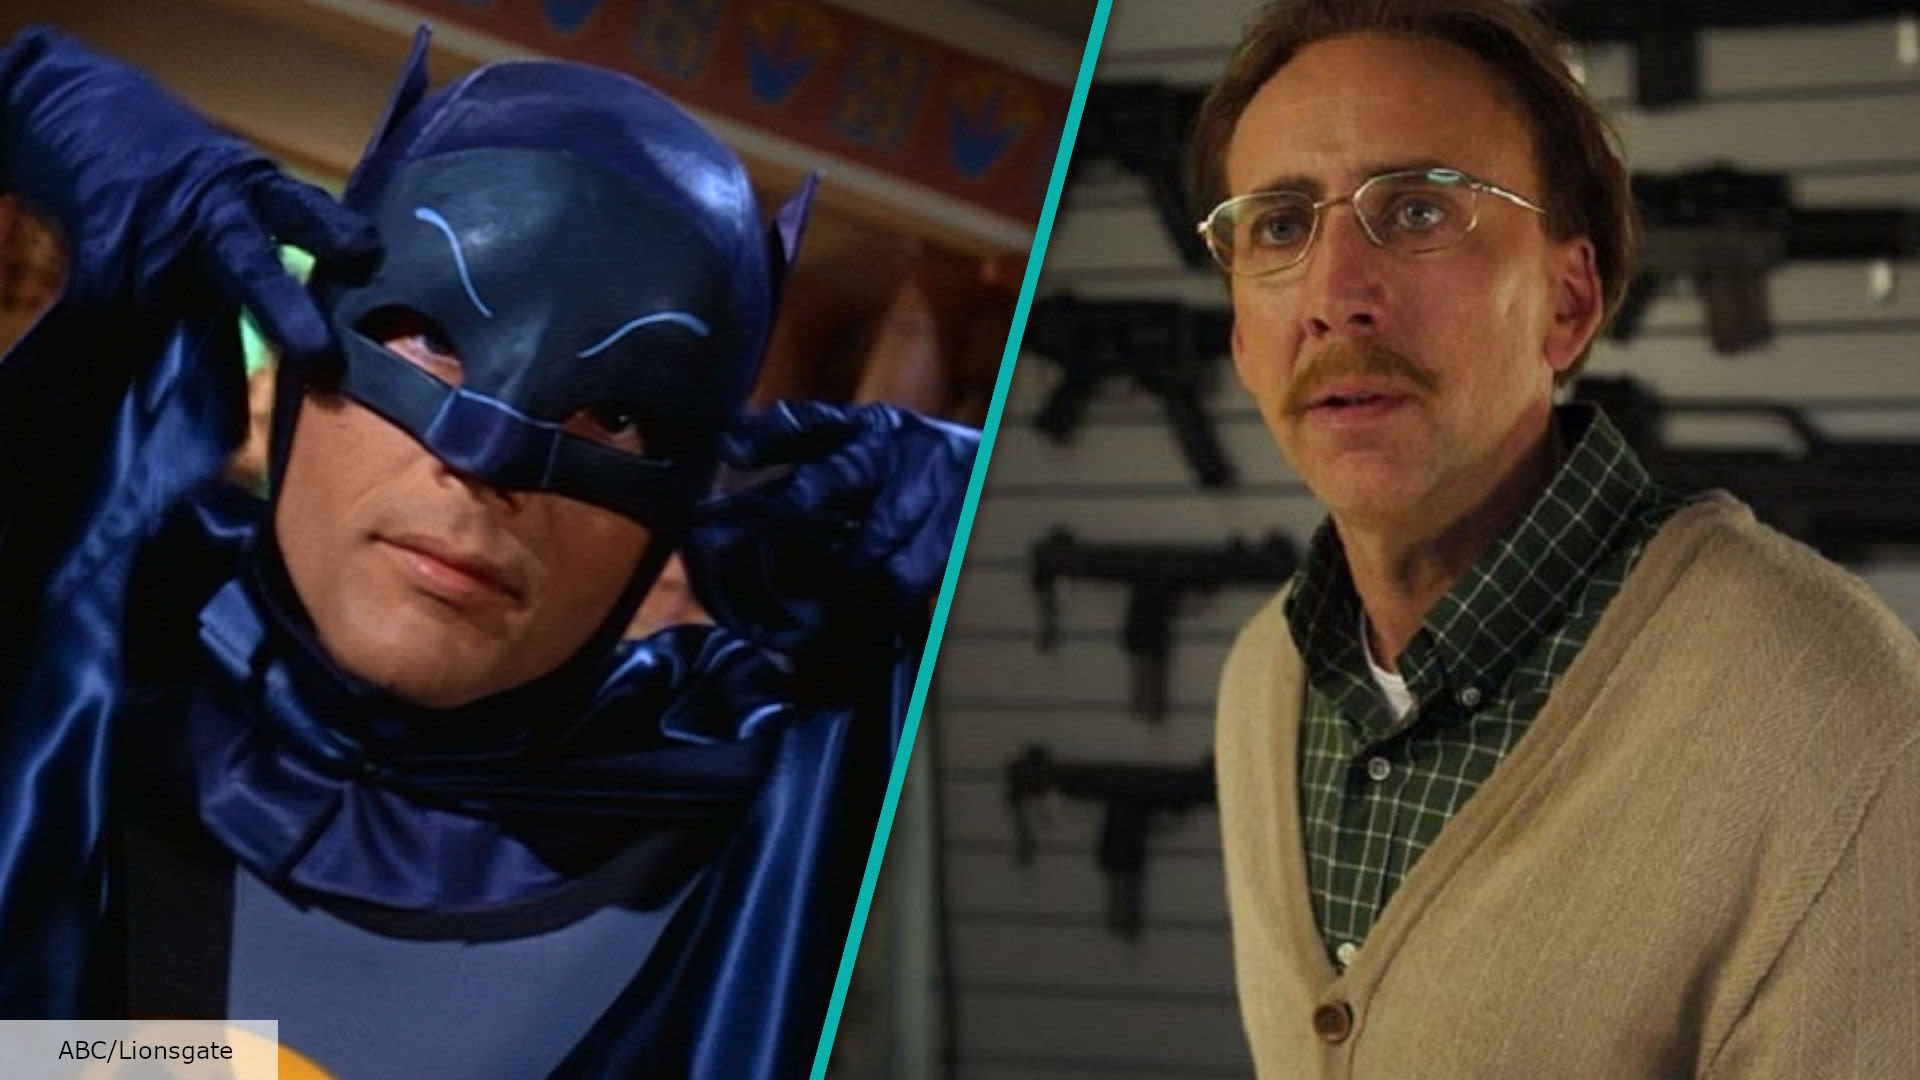 Adam West once made fun of Nicolas Cage’s acting